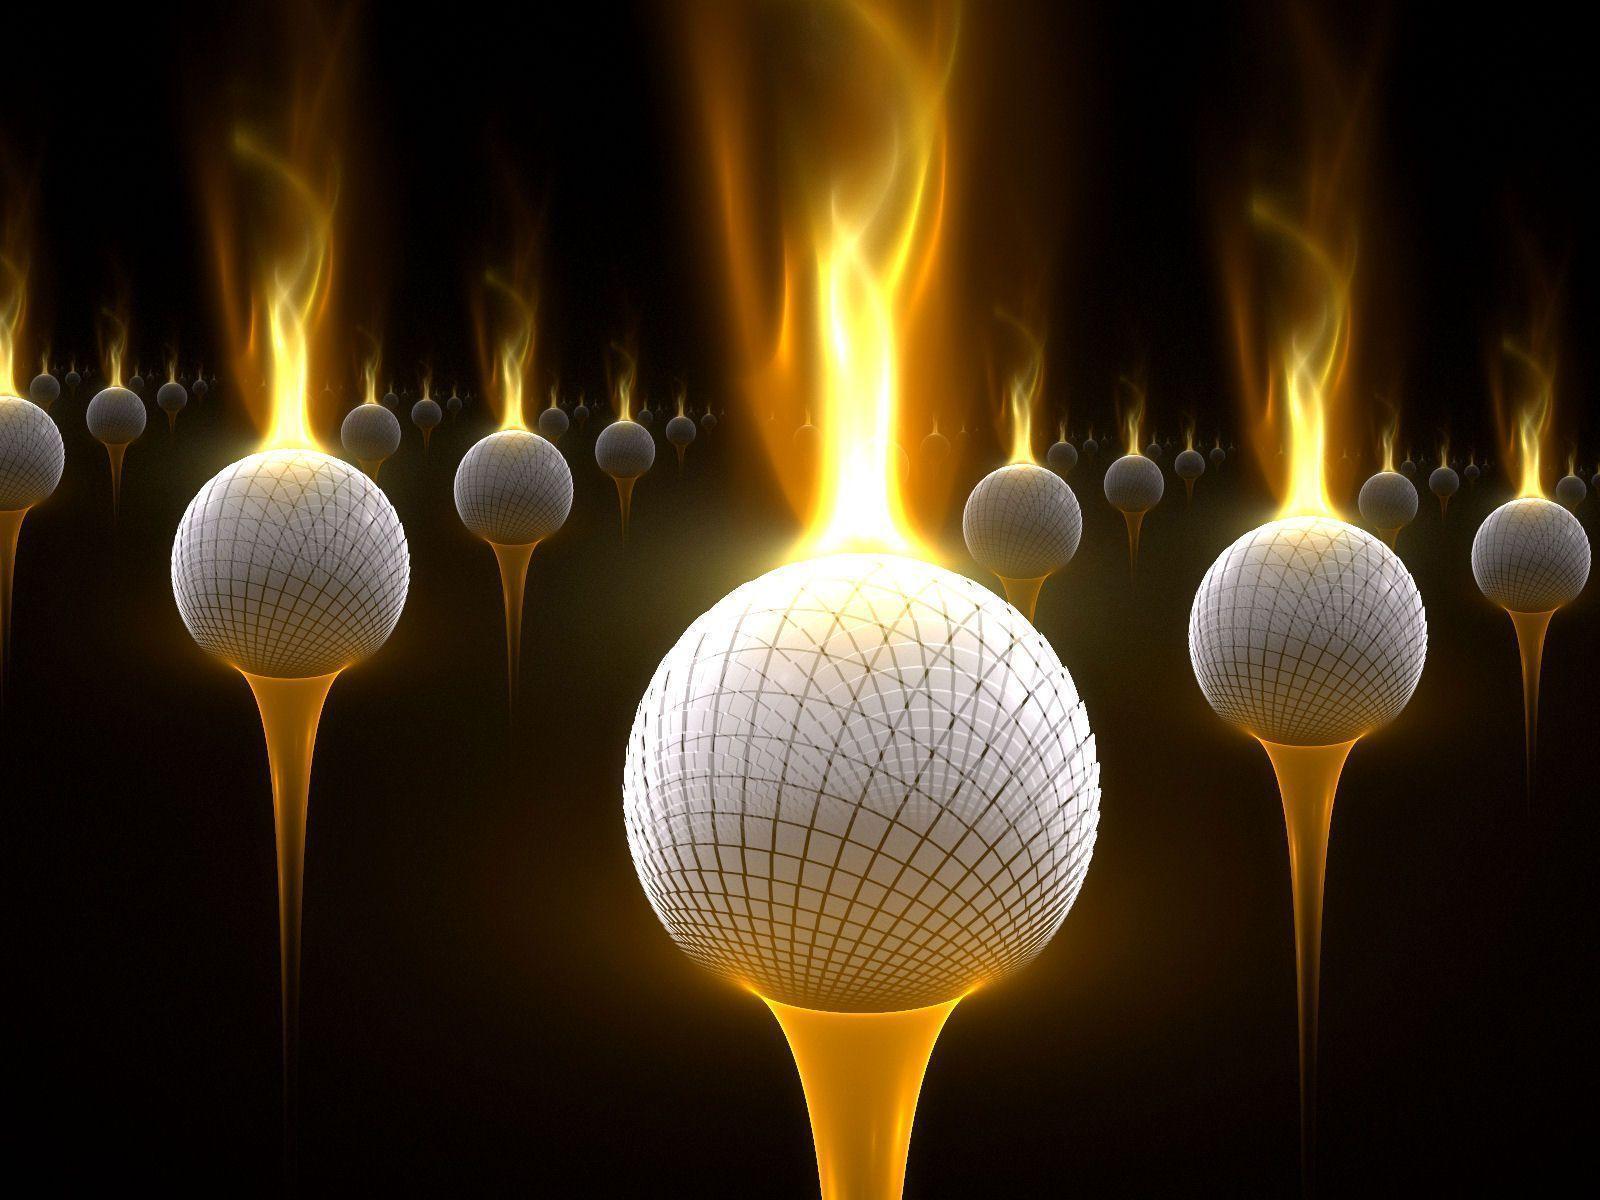 Cool Golf Backgrounds - Wallpaper Cave